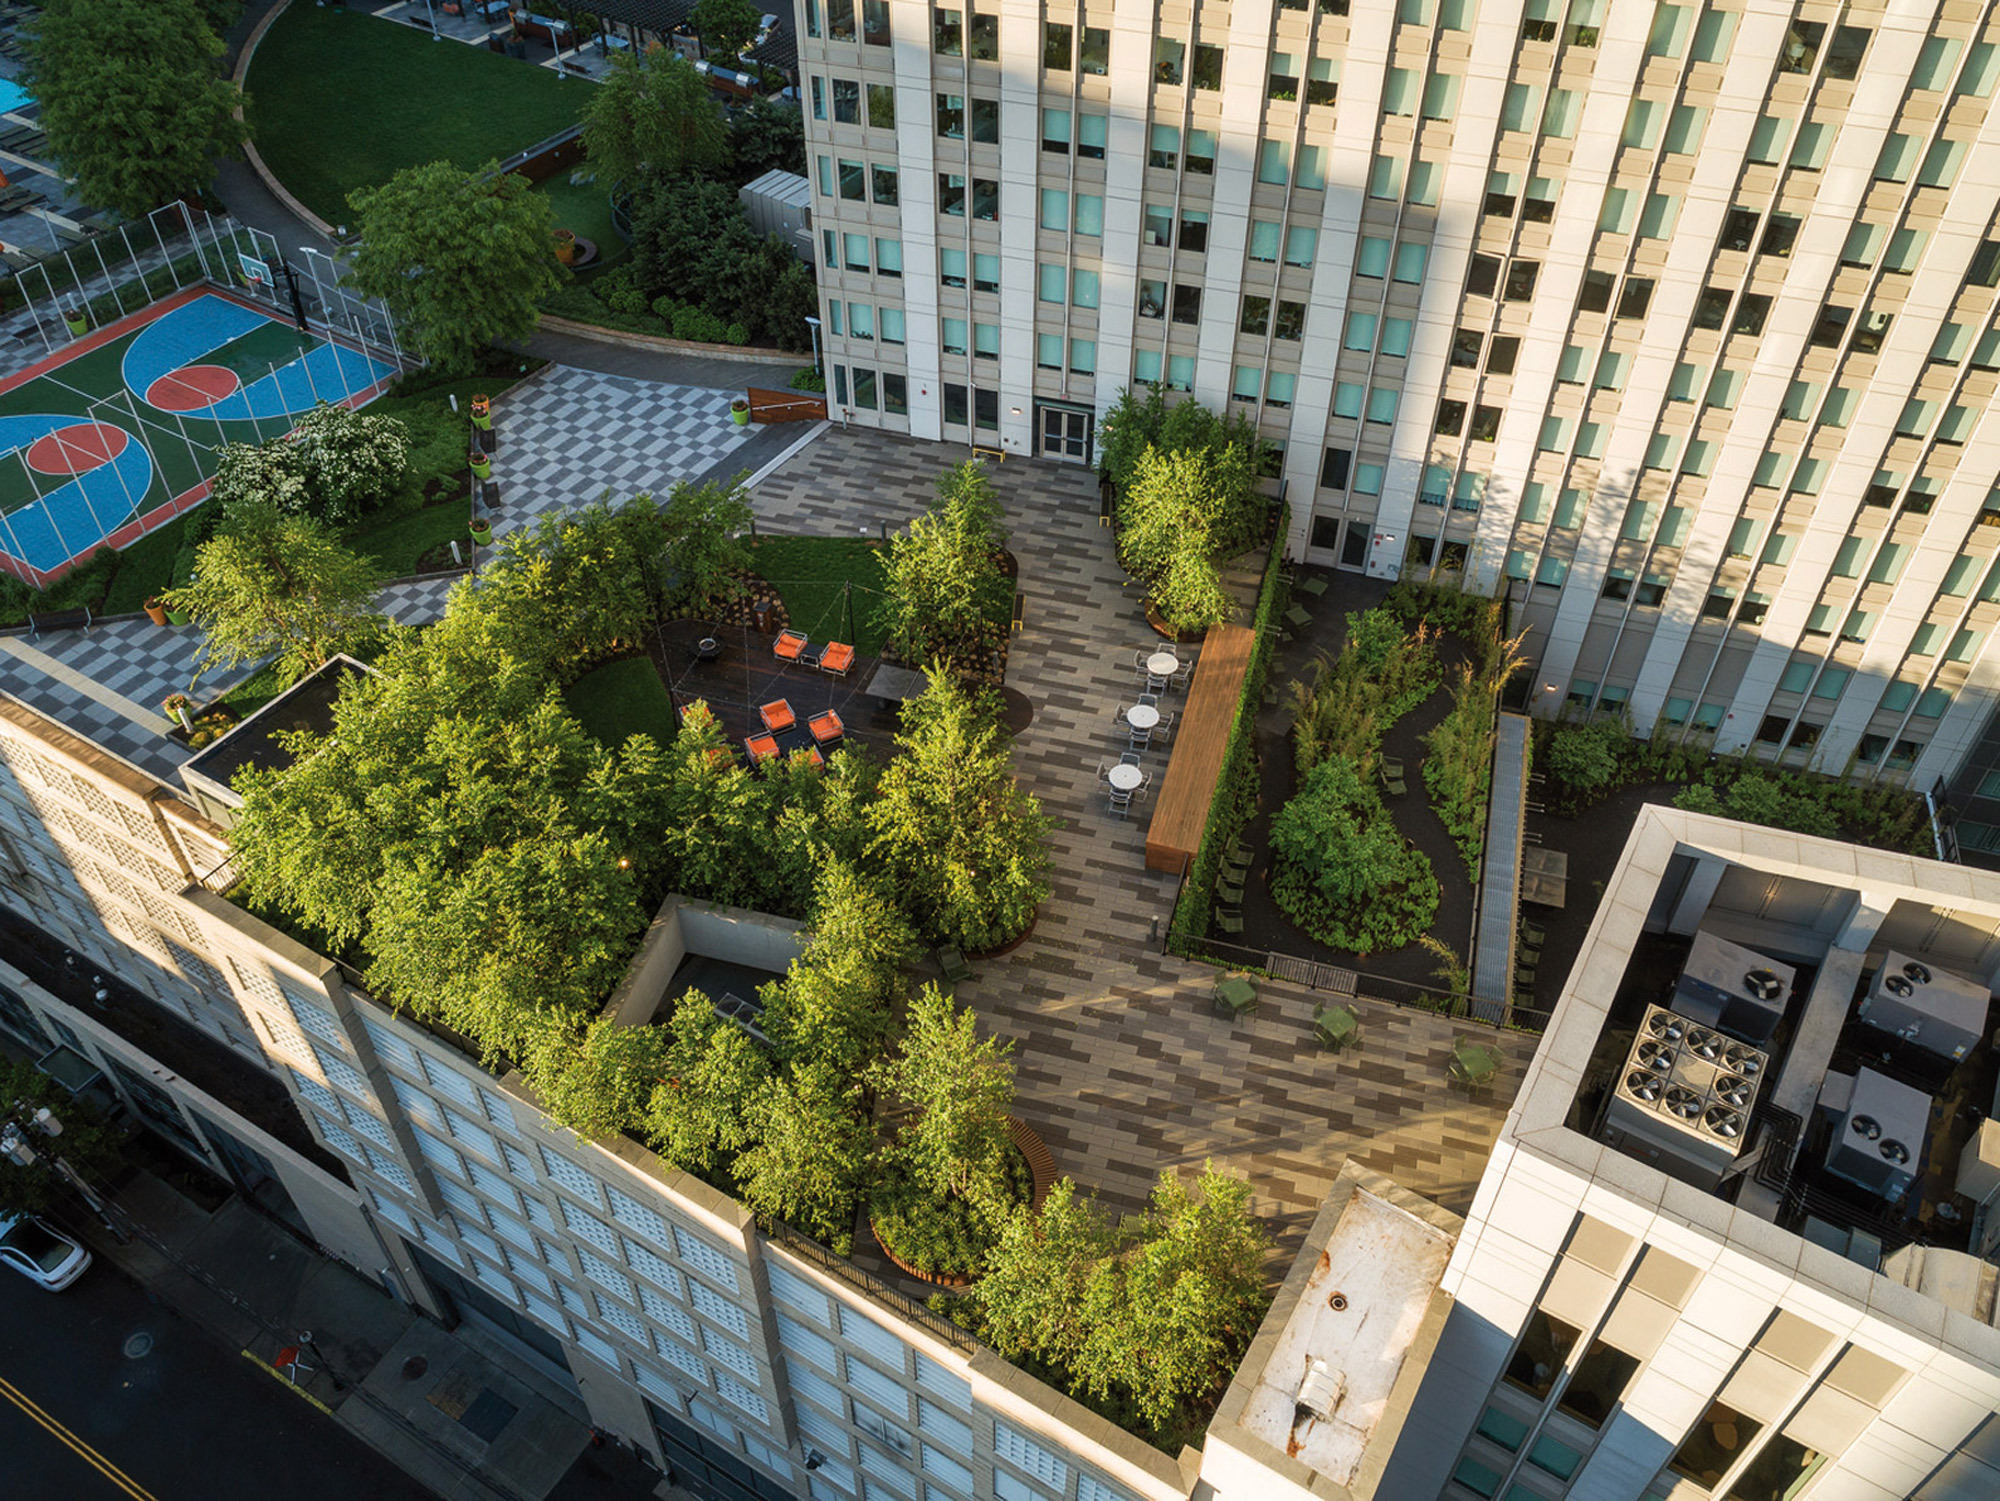 Rooftop garden on an urban high-rise building, featuring organized green spaces, wooden pathways, contemporary outdoor furniture, and an adjacent basketball court, harmoniously blending leisure with cityscape.